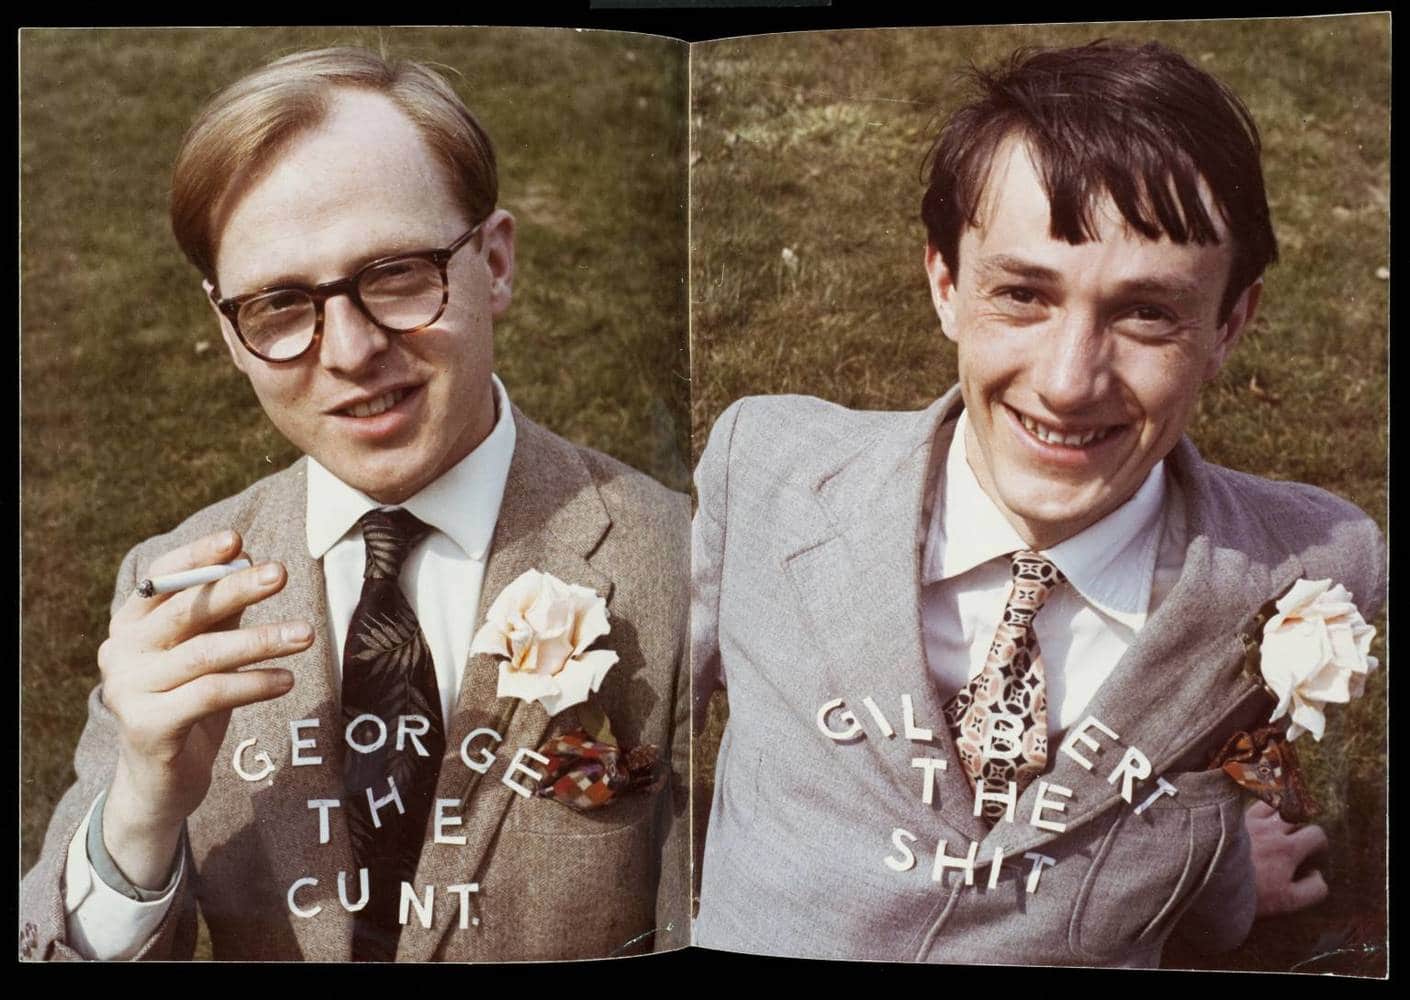 George the Cunt and Gilbert the Shit 1969 by Gilbert & George born 1943, born 1942